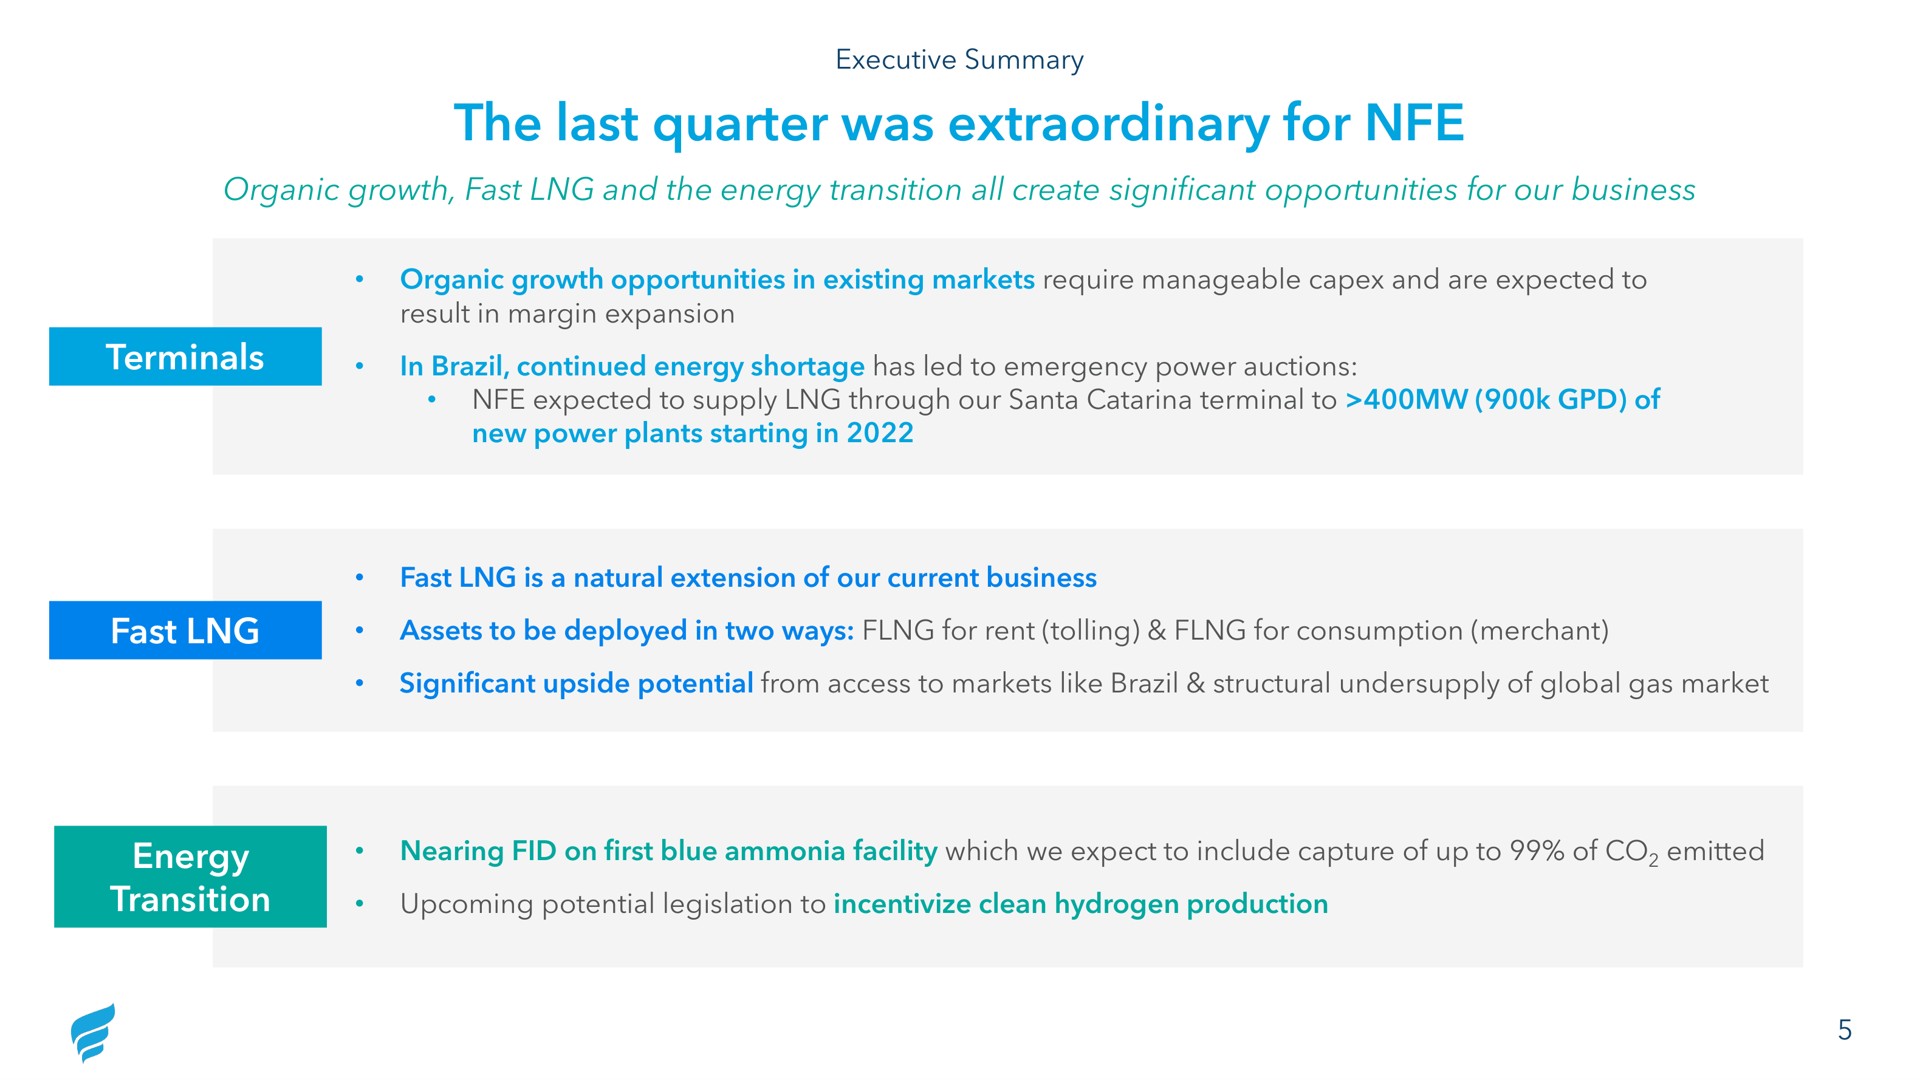 the last quarter was extraordinary for i | NewFortress Energy